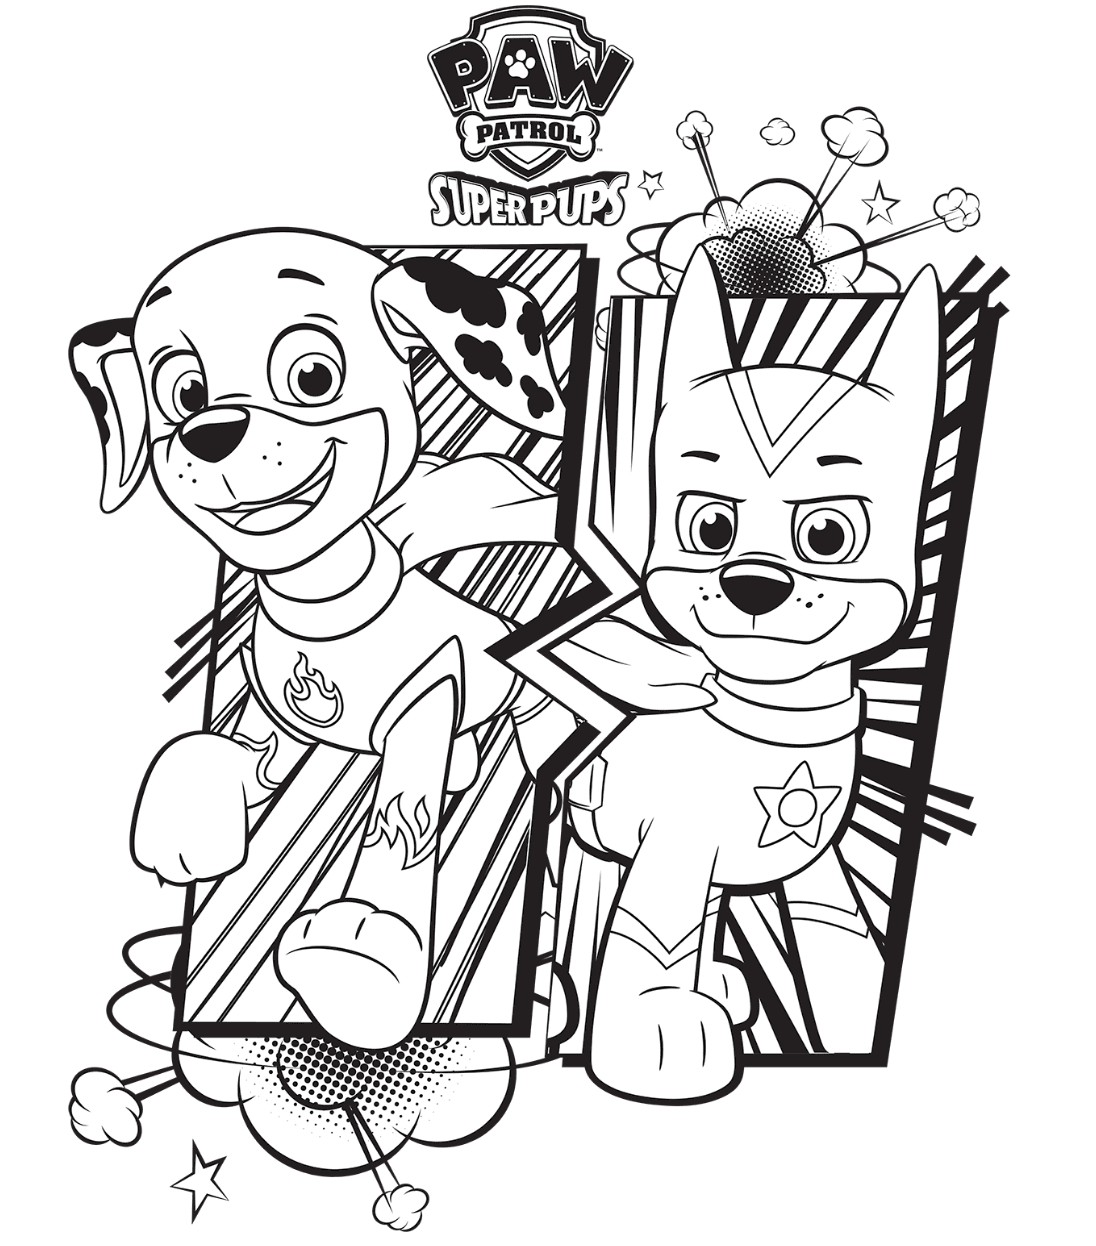 Welp Free Paw Patrol Coloring Pages, Download Free Clip Art, Free Clip TX-14